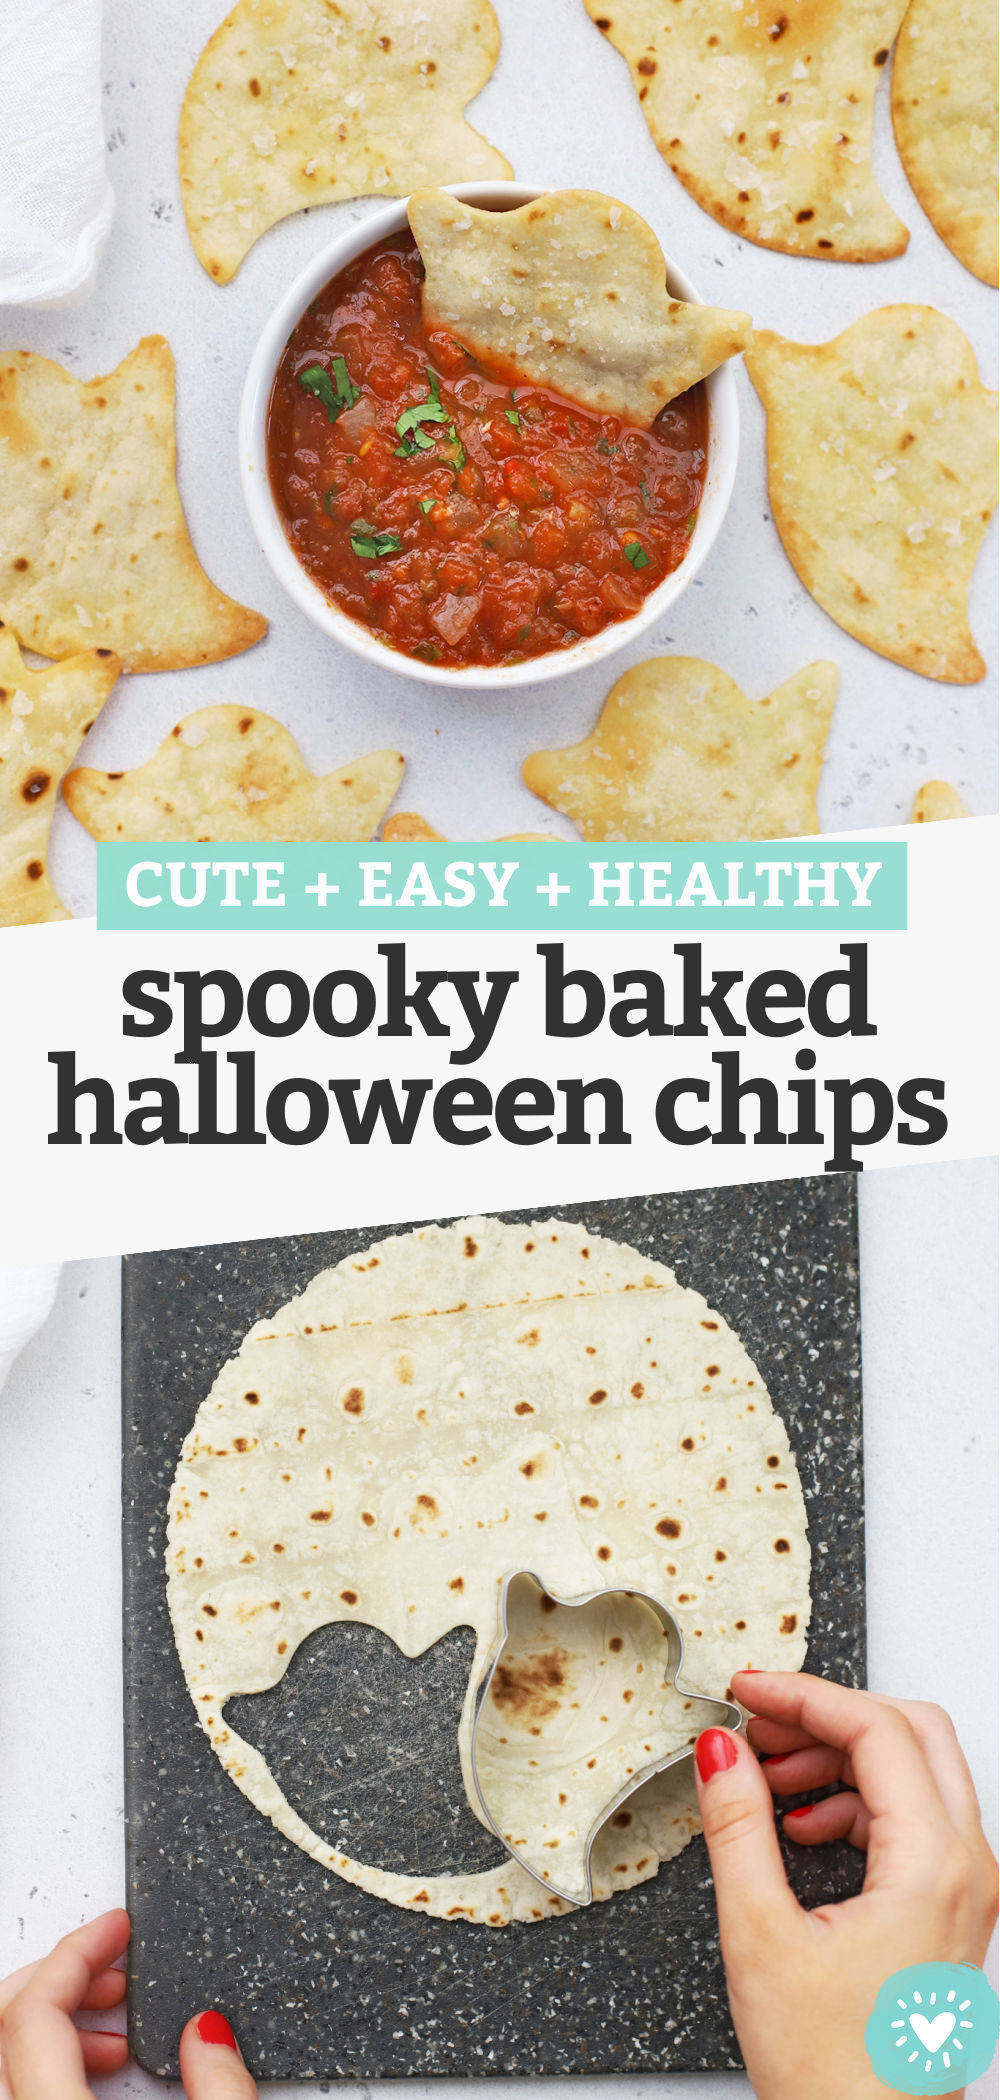 Spooky Baked Ghost Chips - You only need 15 minutes and 3 ingredients to make these adorable Halloween chips. The perfect spooky Halloween snack! Don't miss our favorite dips below! (Gluten-Free, Paleo-Friendly, Vegan-Friendly) // Halloween Snacks for Kids // Healthy Halloween Snack // Baked Ghost Chips // Halloween Chips